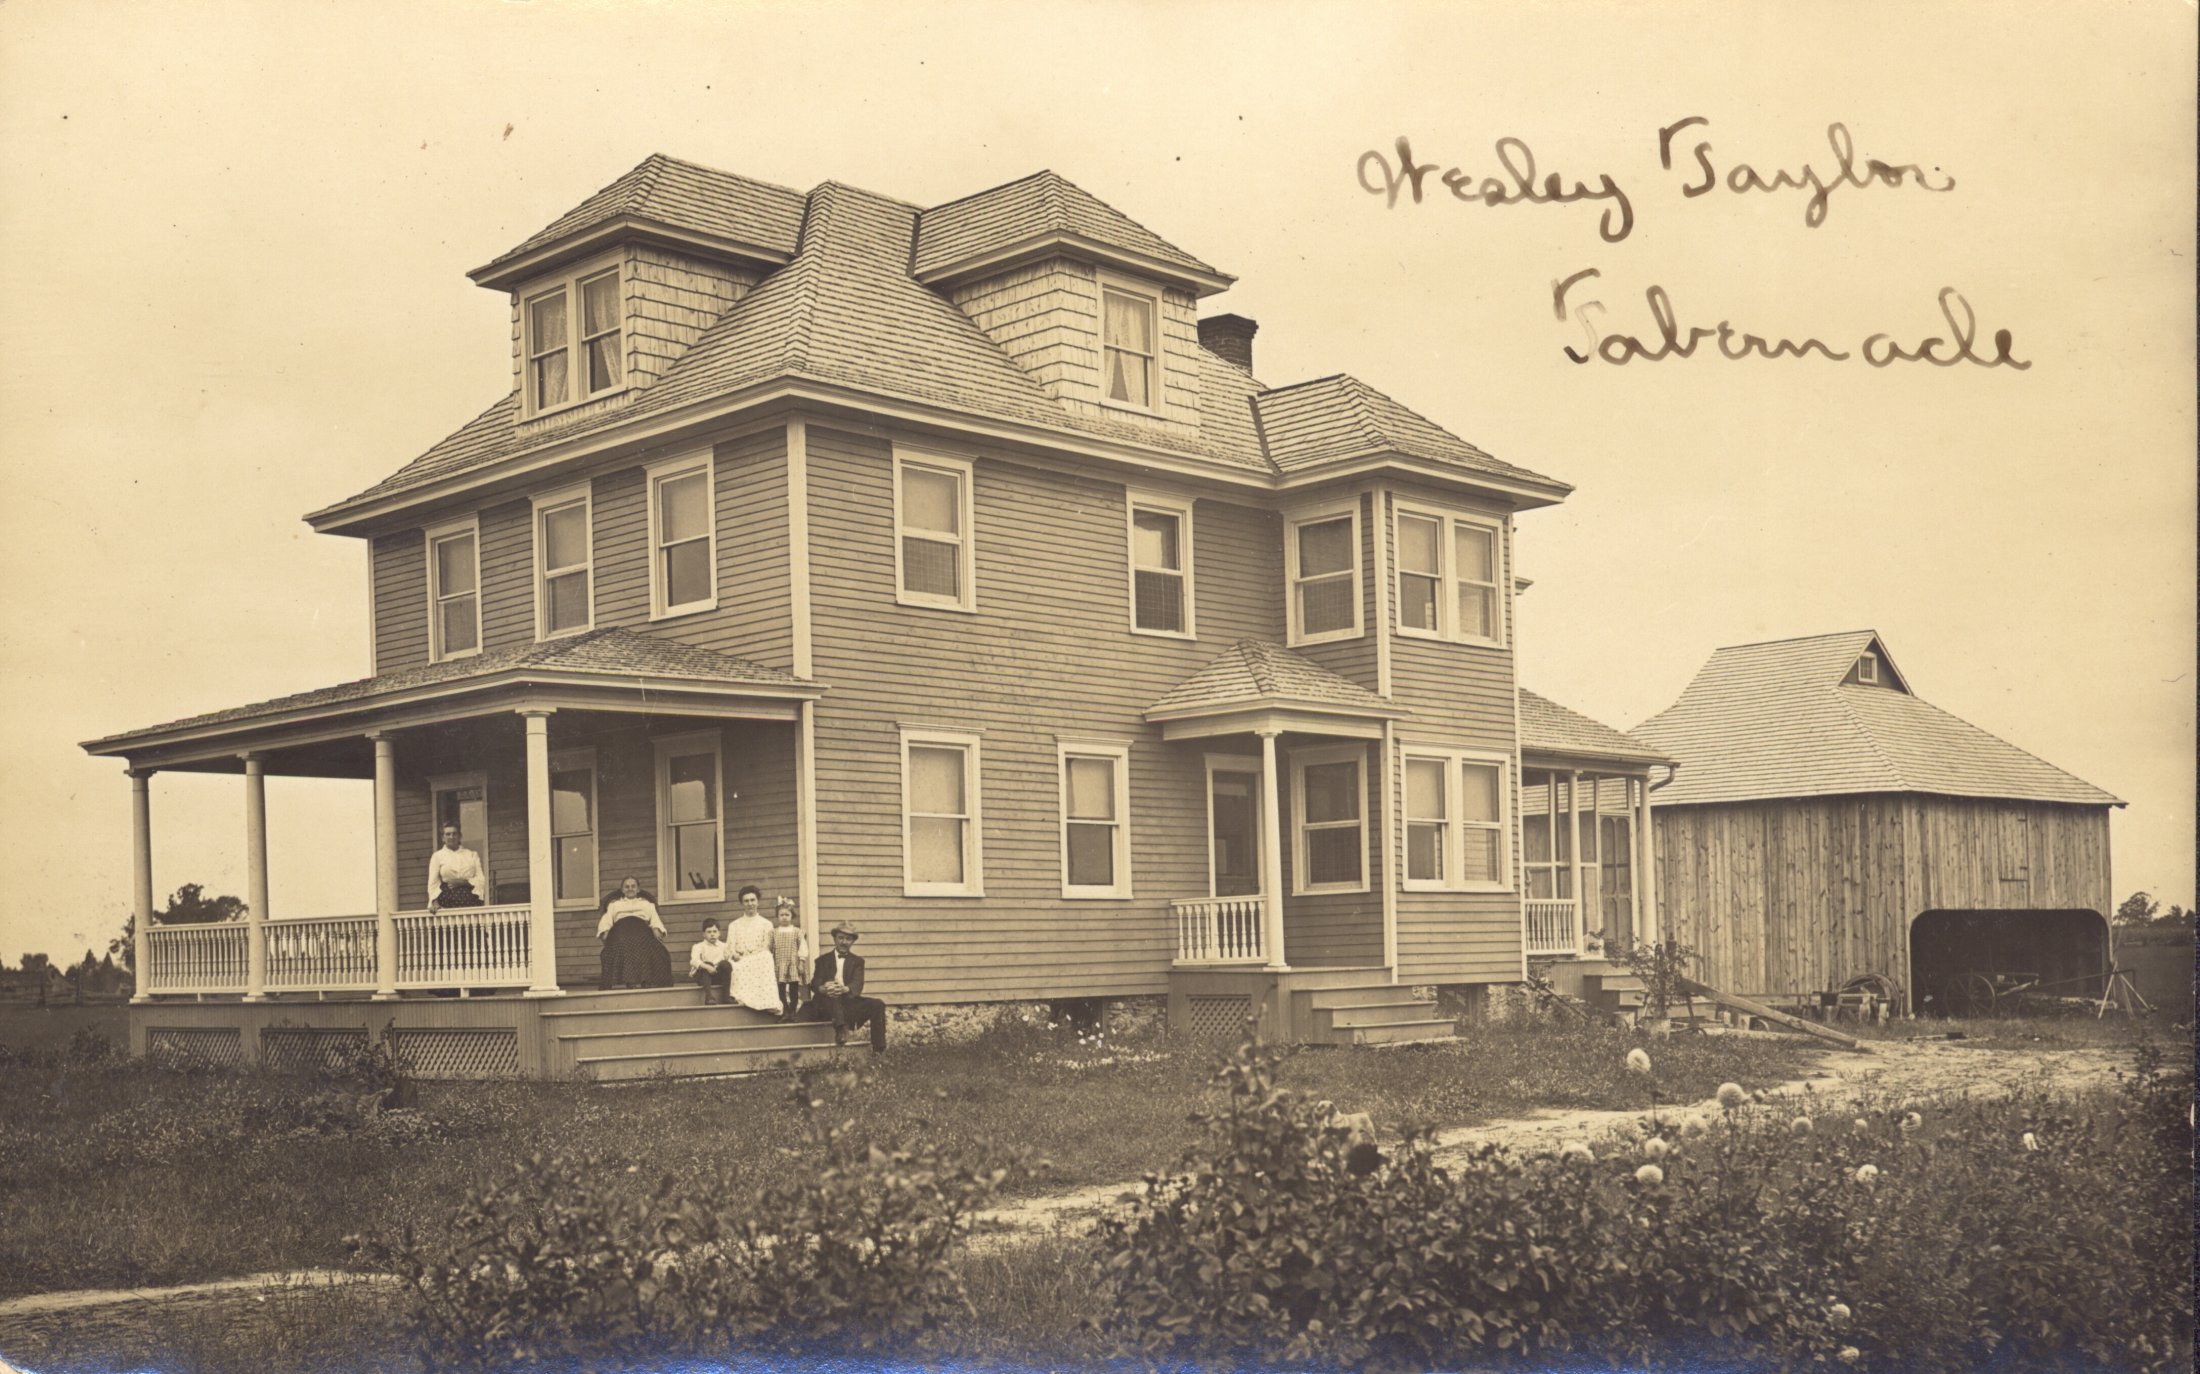 Tabernacle - Healey Taylor House - Family on porch and steps - Early American Four Square - c 1910 - RW